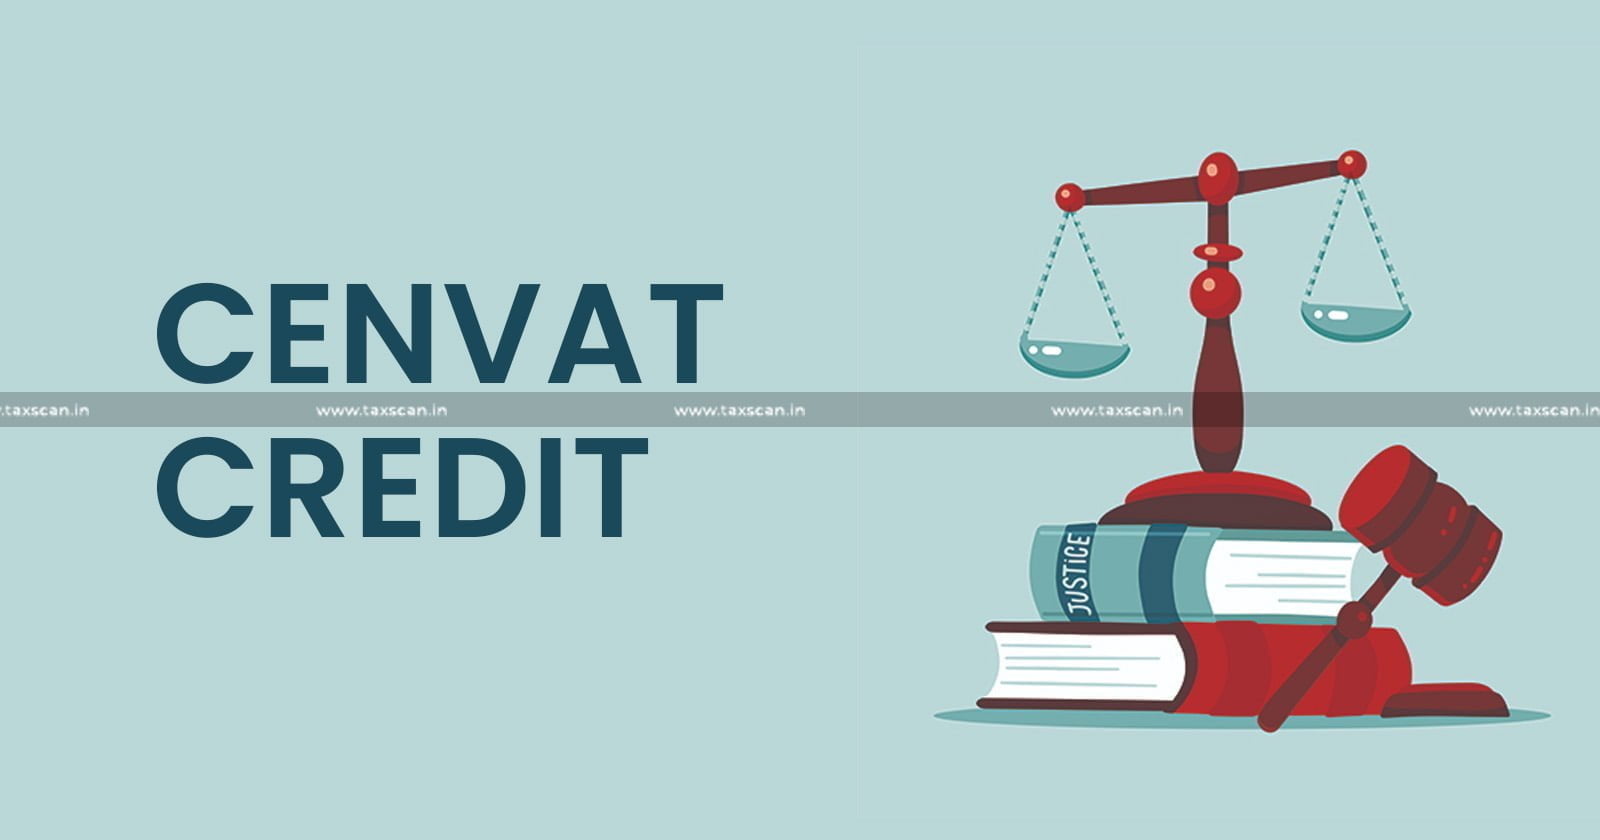 Benefit - Cenvat credit - Availed - Anyone Outside India - CESTAT - taxscan